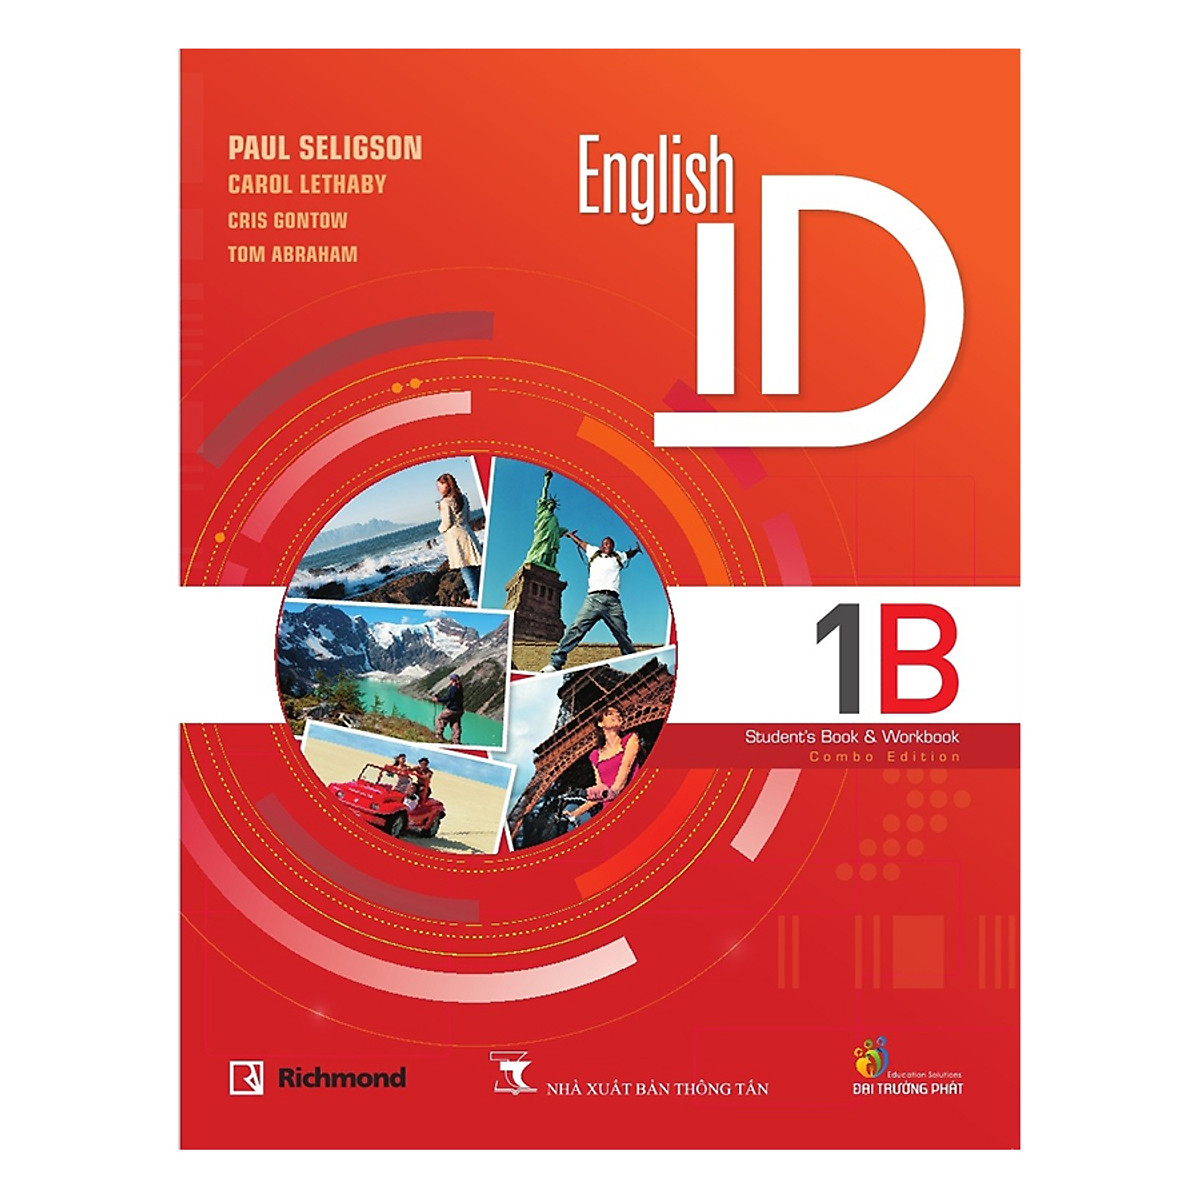 English ID 1B Student's Book - Pack (Student Book And Class CD With English Central Code)